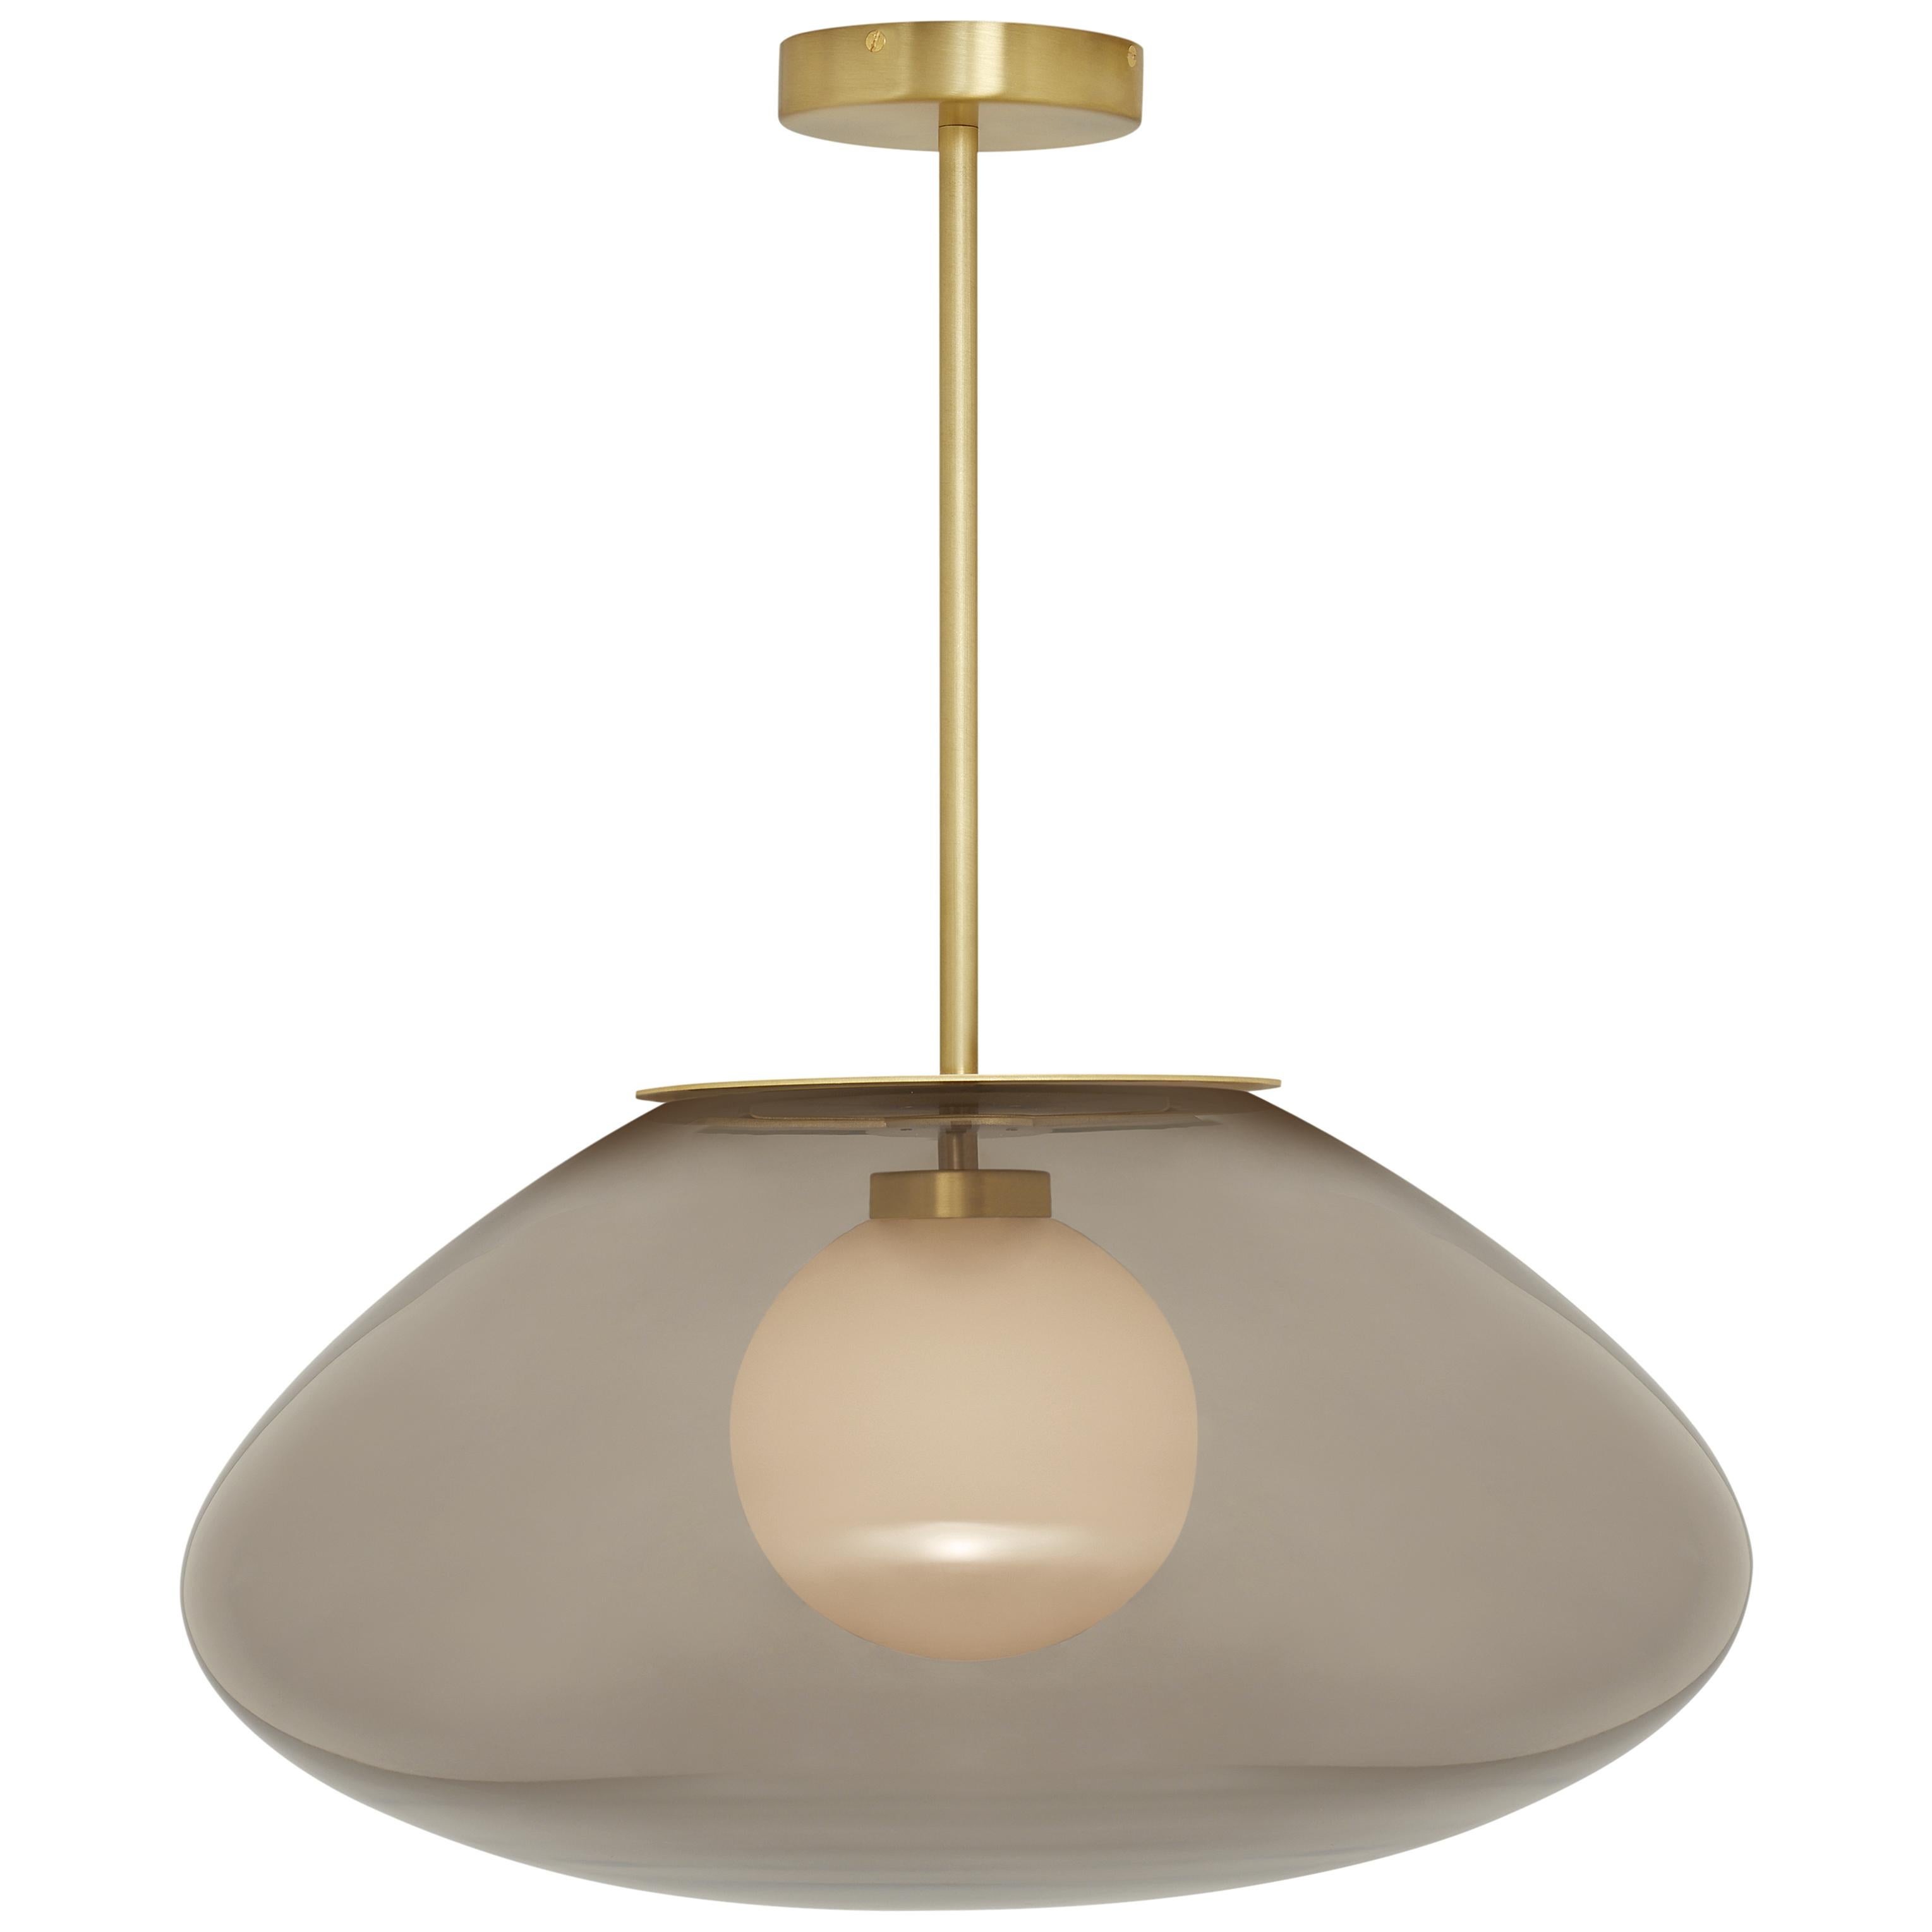 Petra large pendant by CTO Lighting
Materials: satin brass with smoked glass shade and hand shaped smoked glass inner shade
Also available in dark bronze with smoked glass shade and hand shaped smoked glass inner shade,
satin brass with smoked